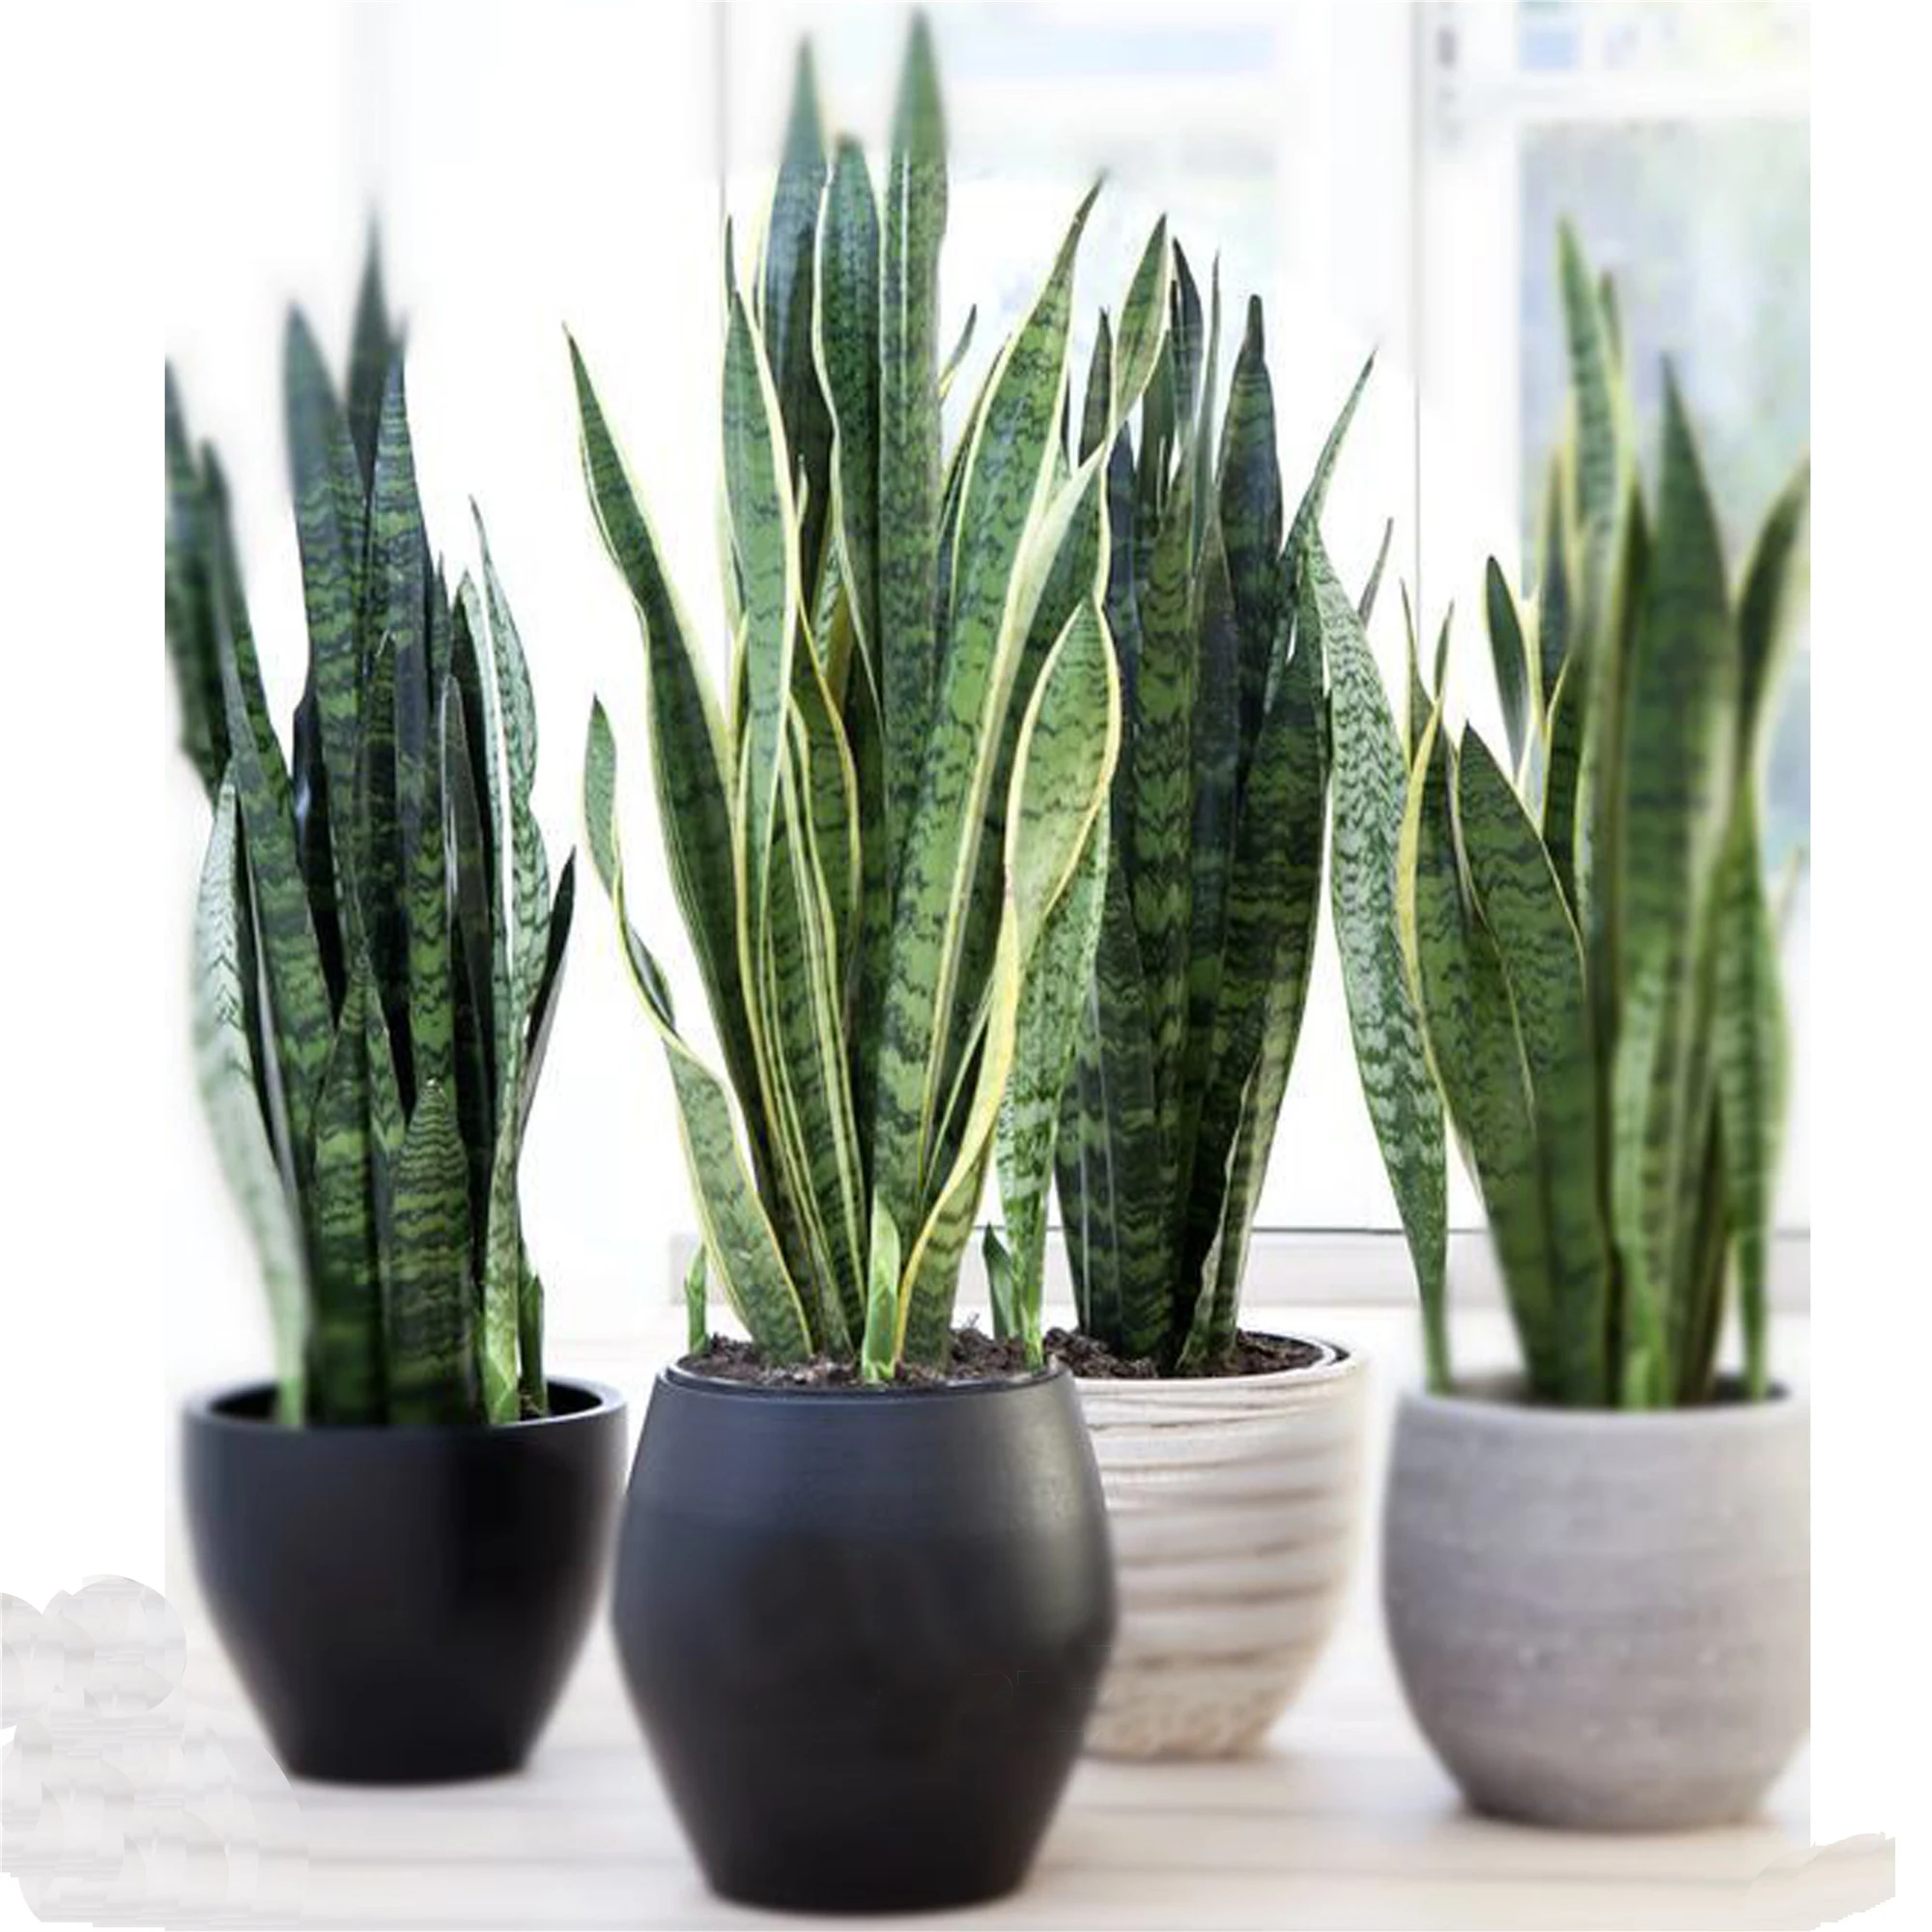 wholesale indoor home decoration artificial Snake plants Sansevieria trifasciata mother in laws tongue plants bonsai potted (62567438555)